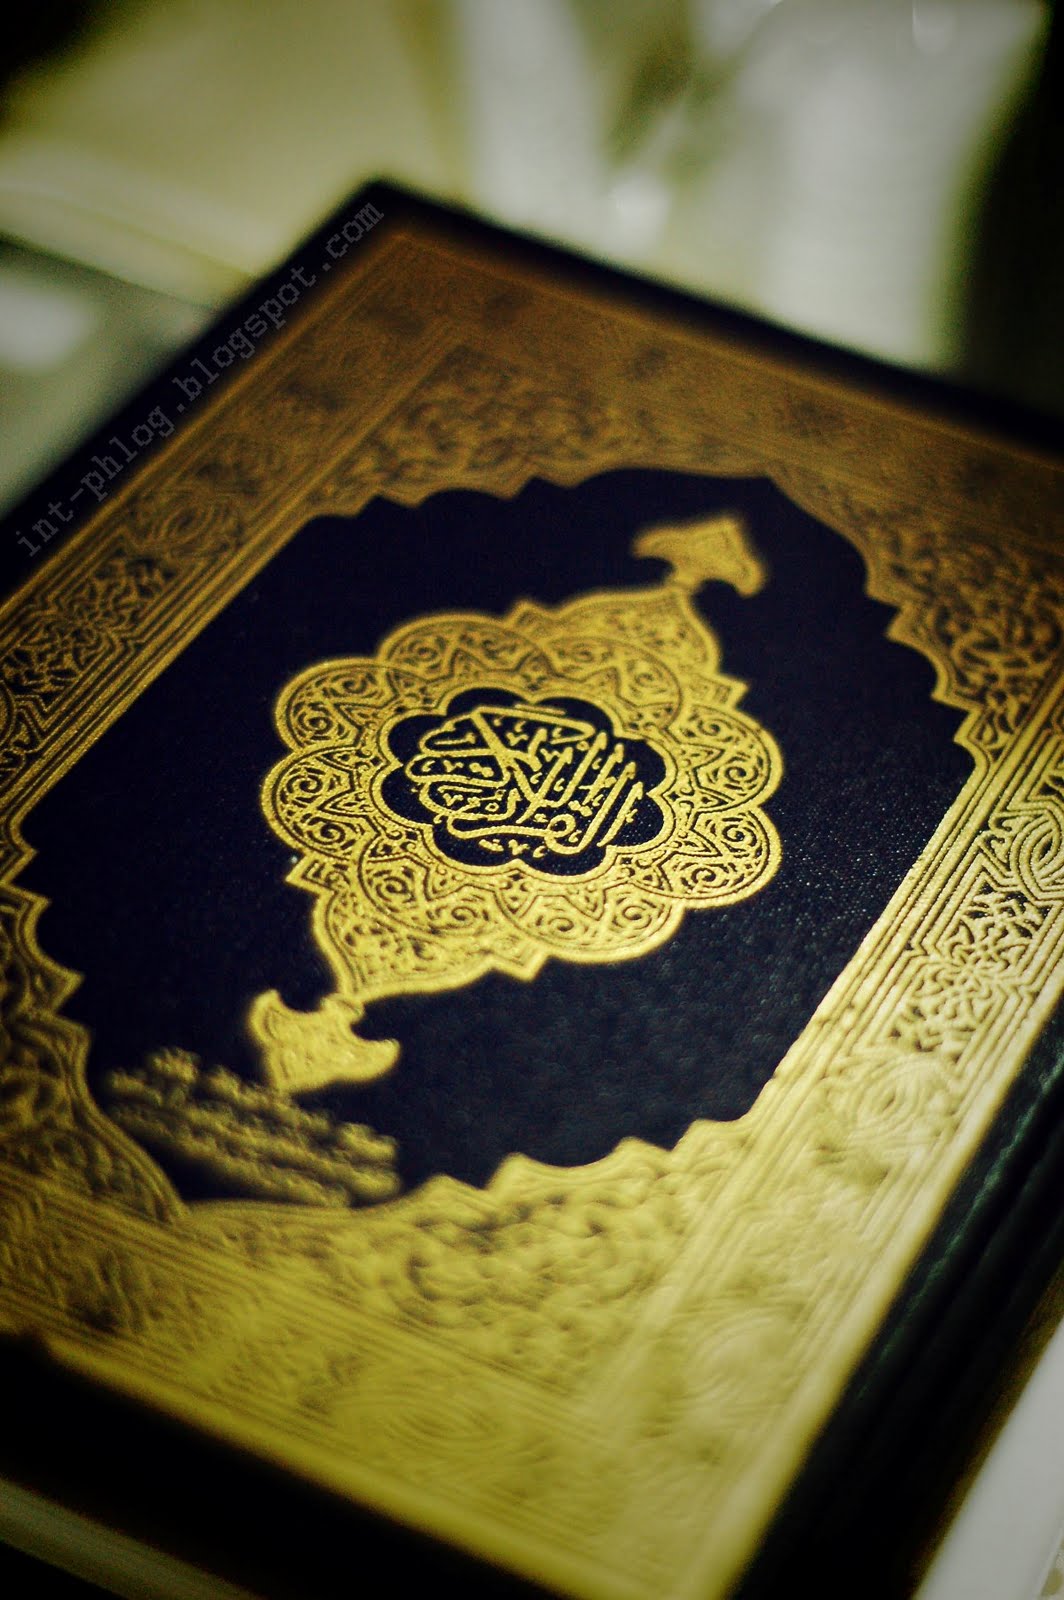 Copy of the Qur'an